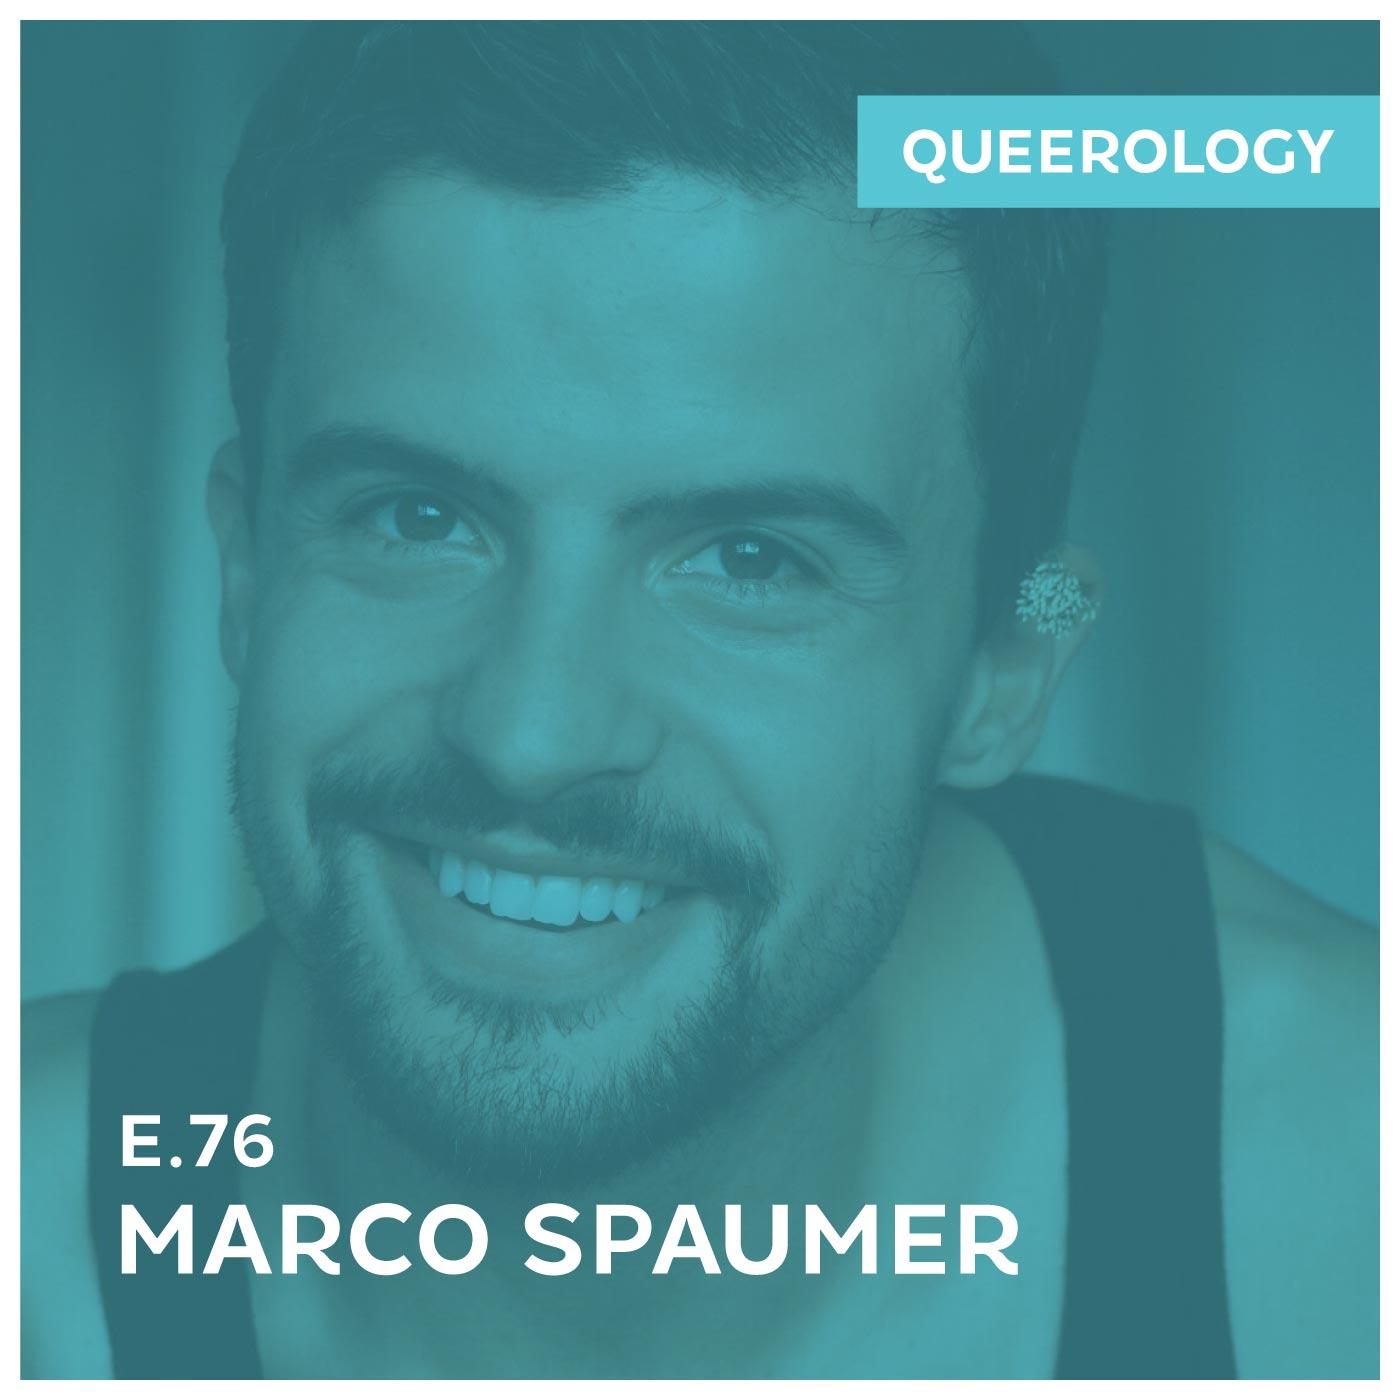 Marco Spaumer is a Soap Opera Star - Episode 76